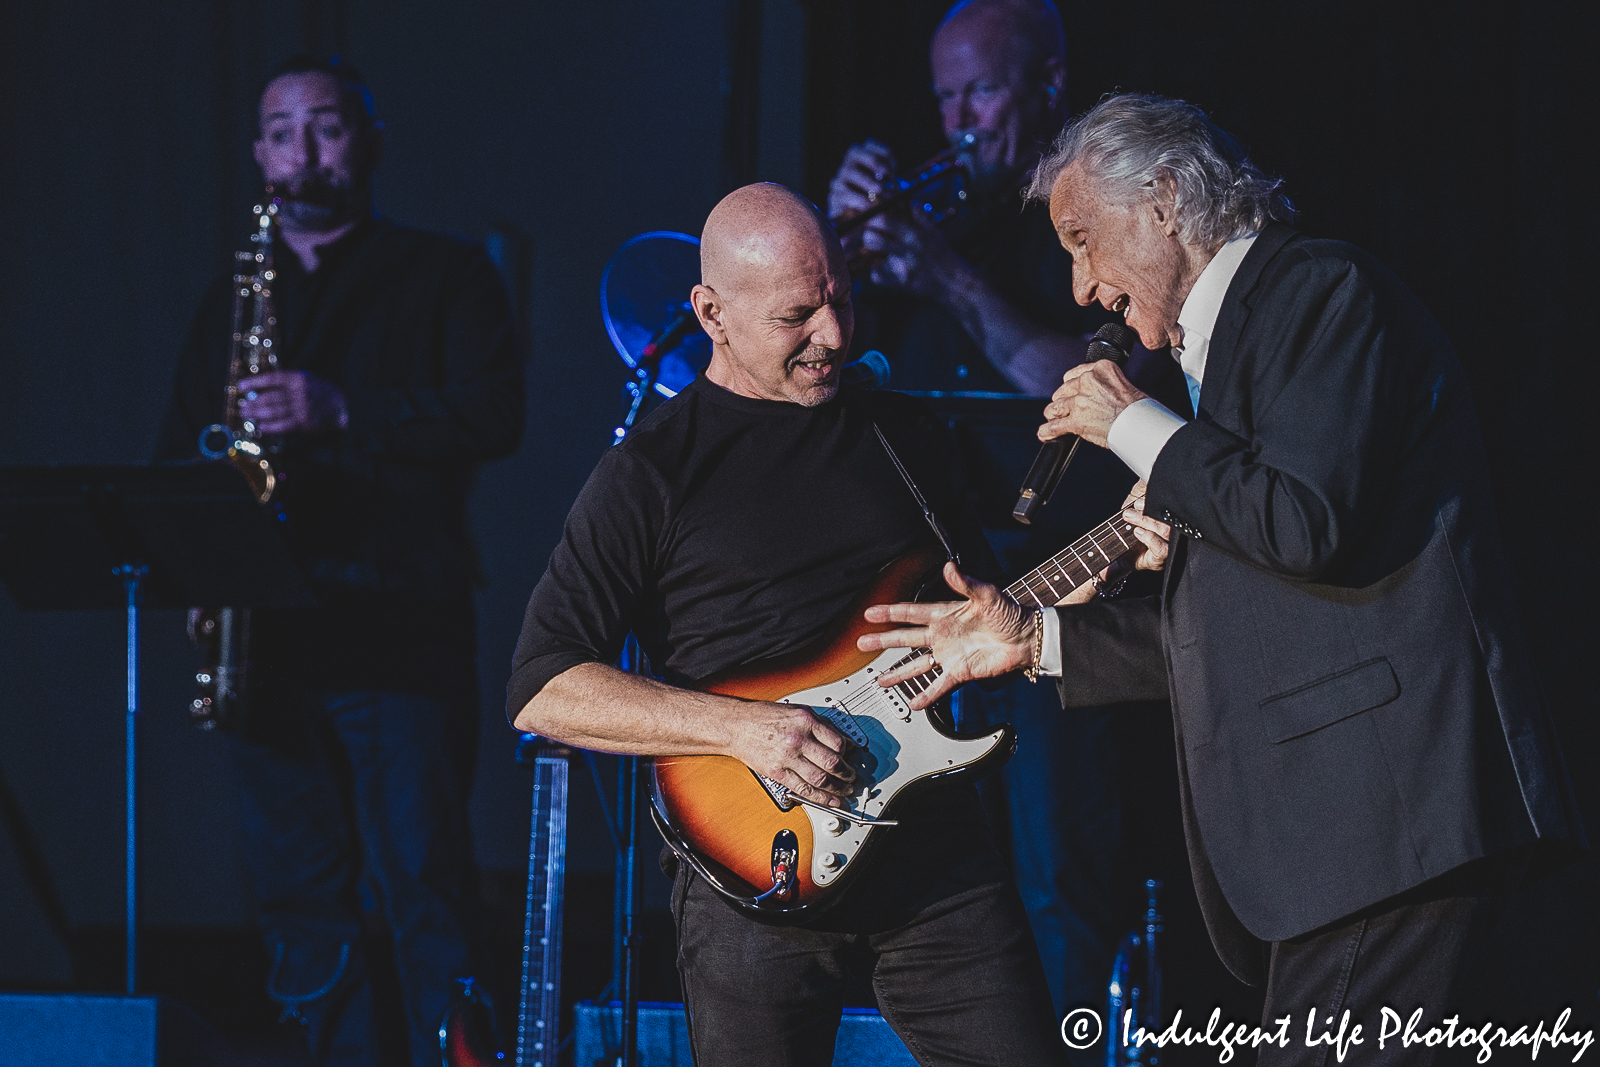 Bill Medley of The Righteous Brothers performing with guitarist Russ Letizia at Prairie Band Casino in Mayetta, KS on June 29, 2023.